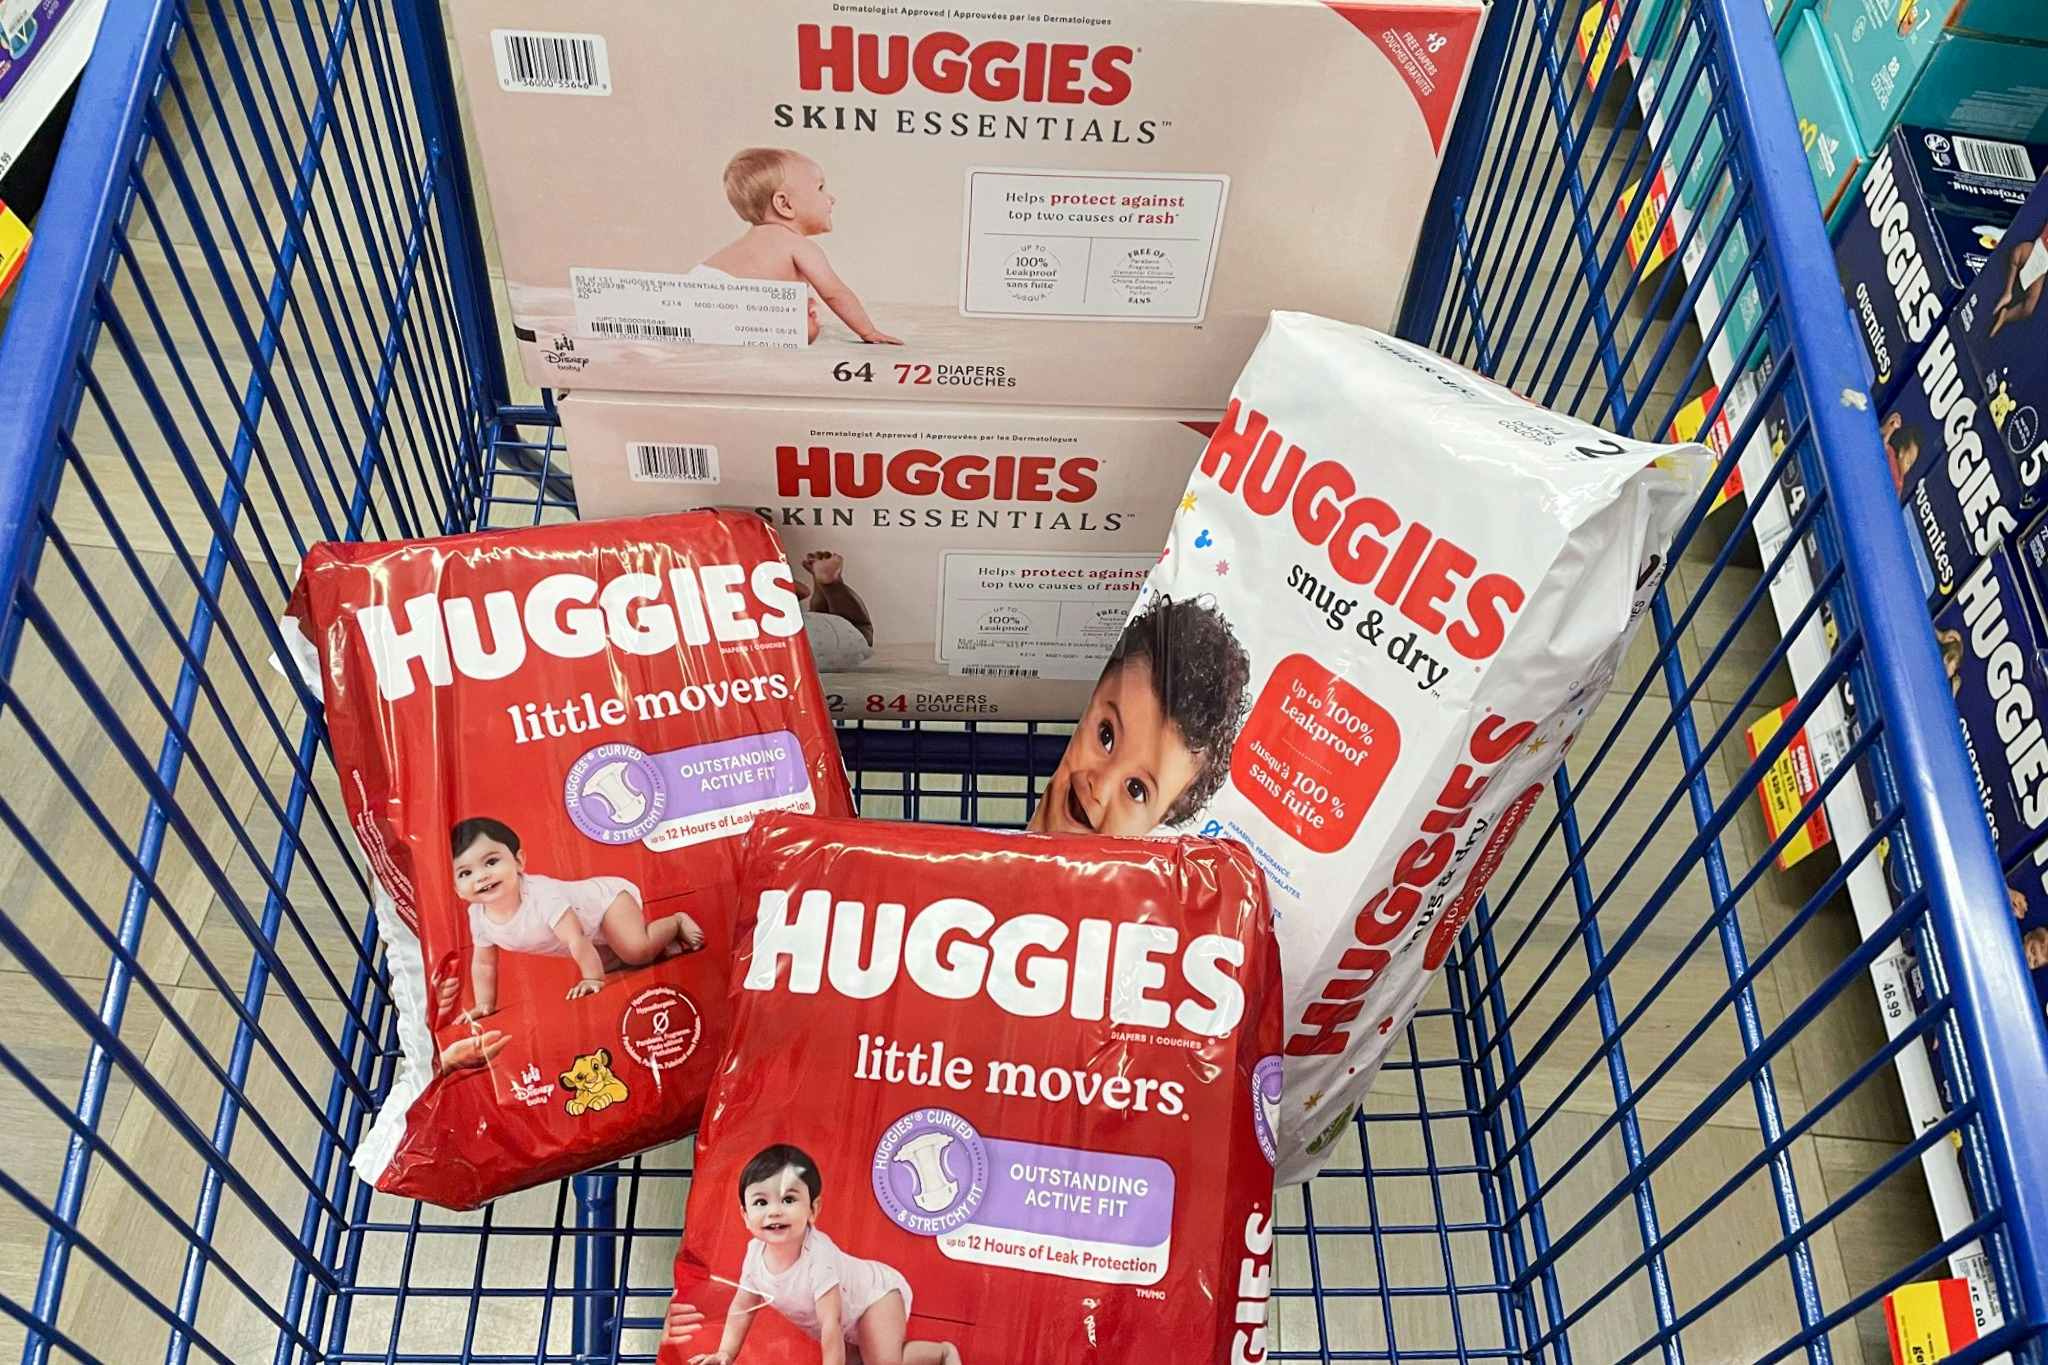 Stock Up on Huggies Diapers for $14.95 at Meijer ($79 Value)